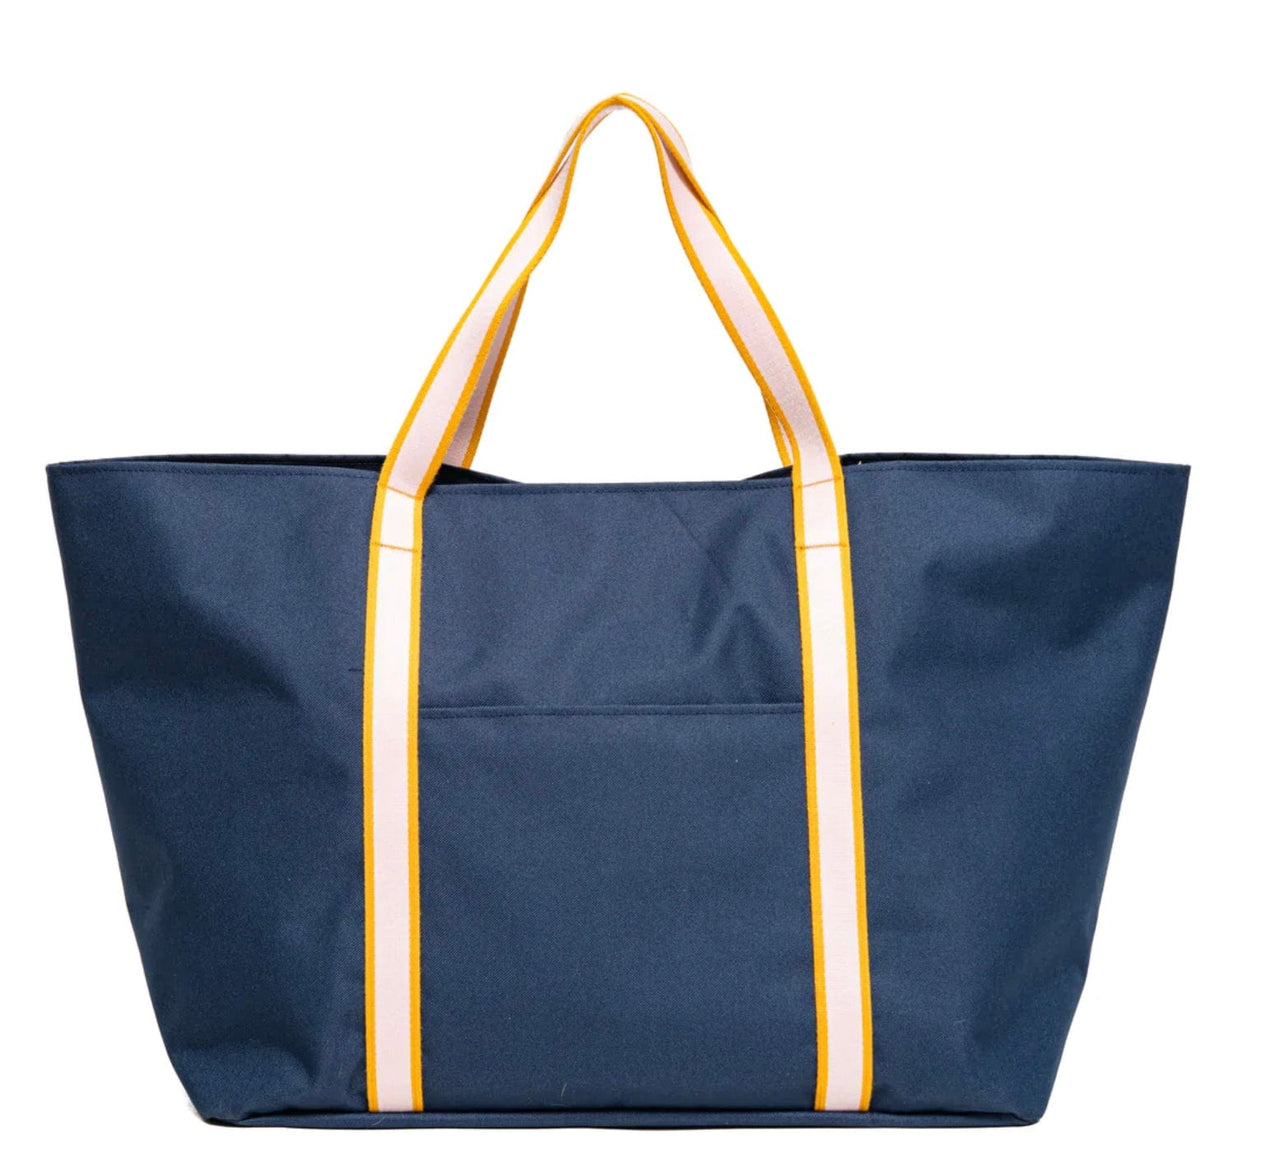 Cinda B Bags Navy with Sunrise Yacht Tote